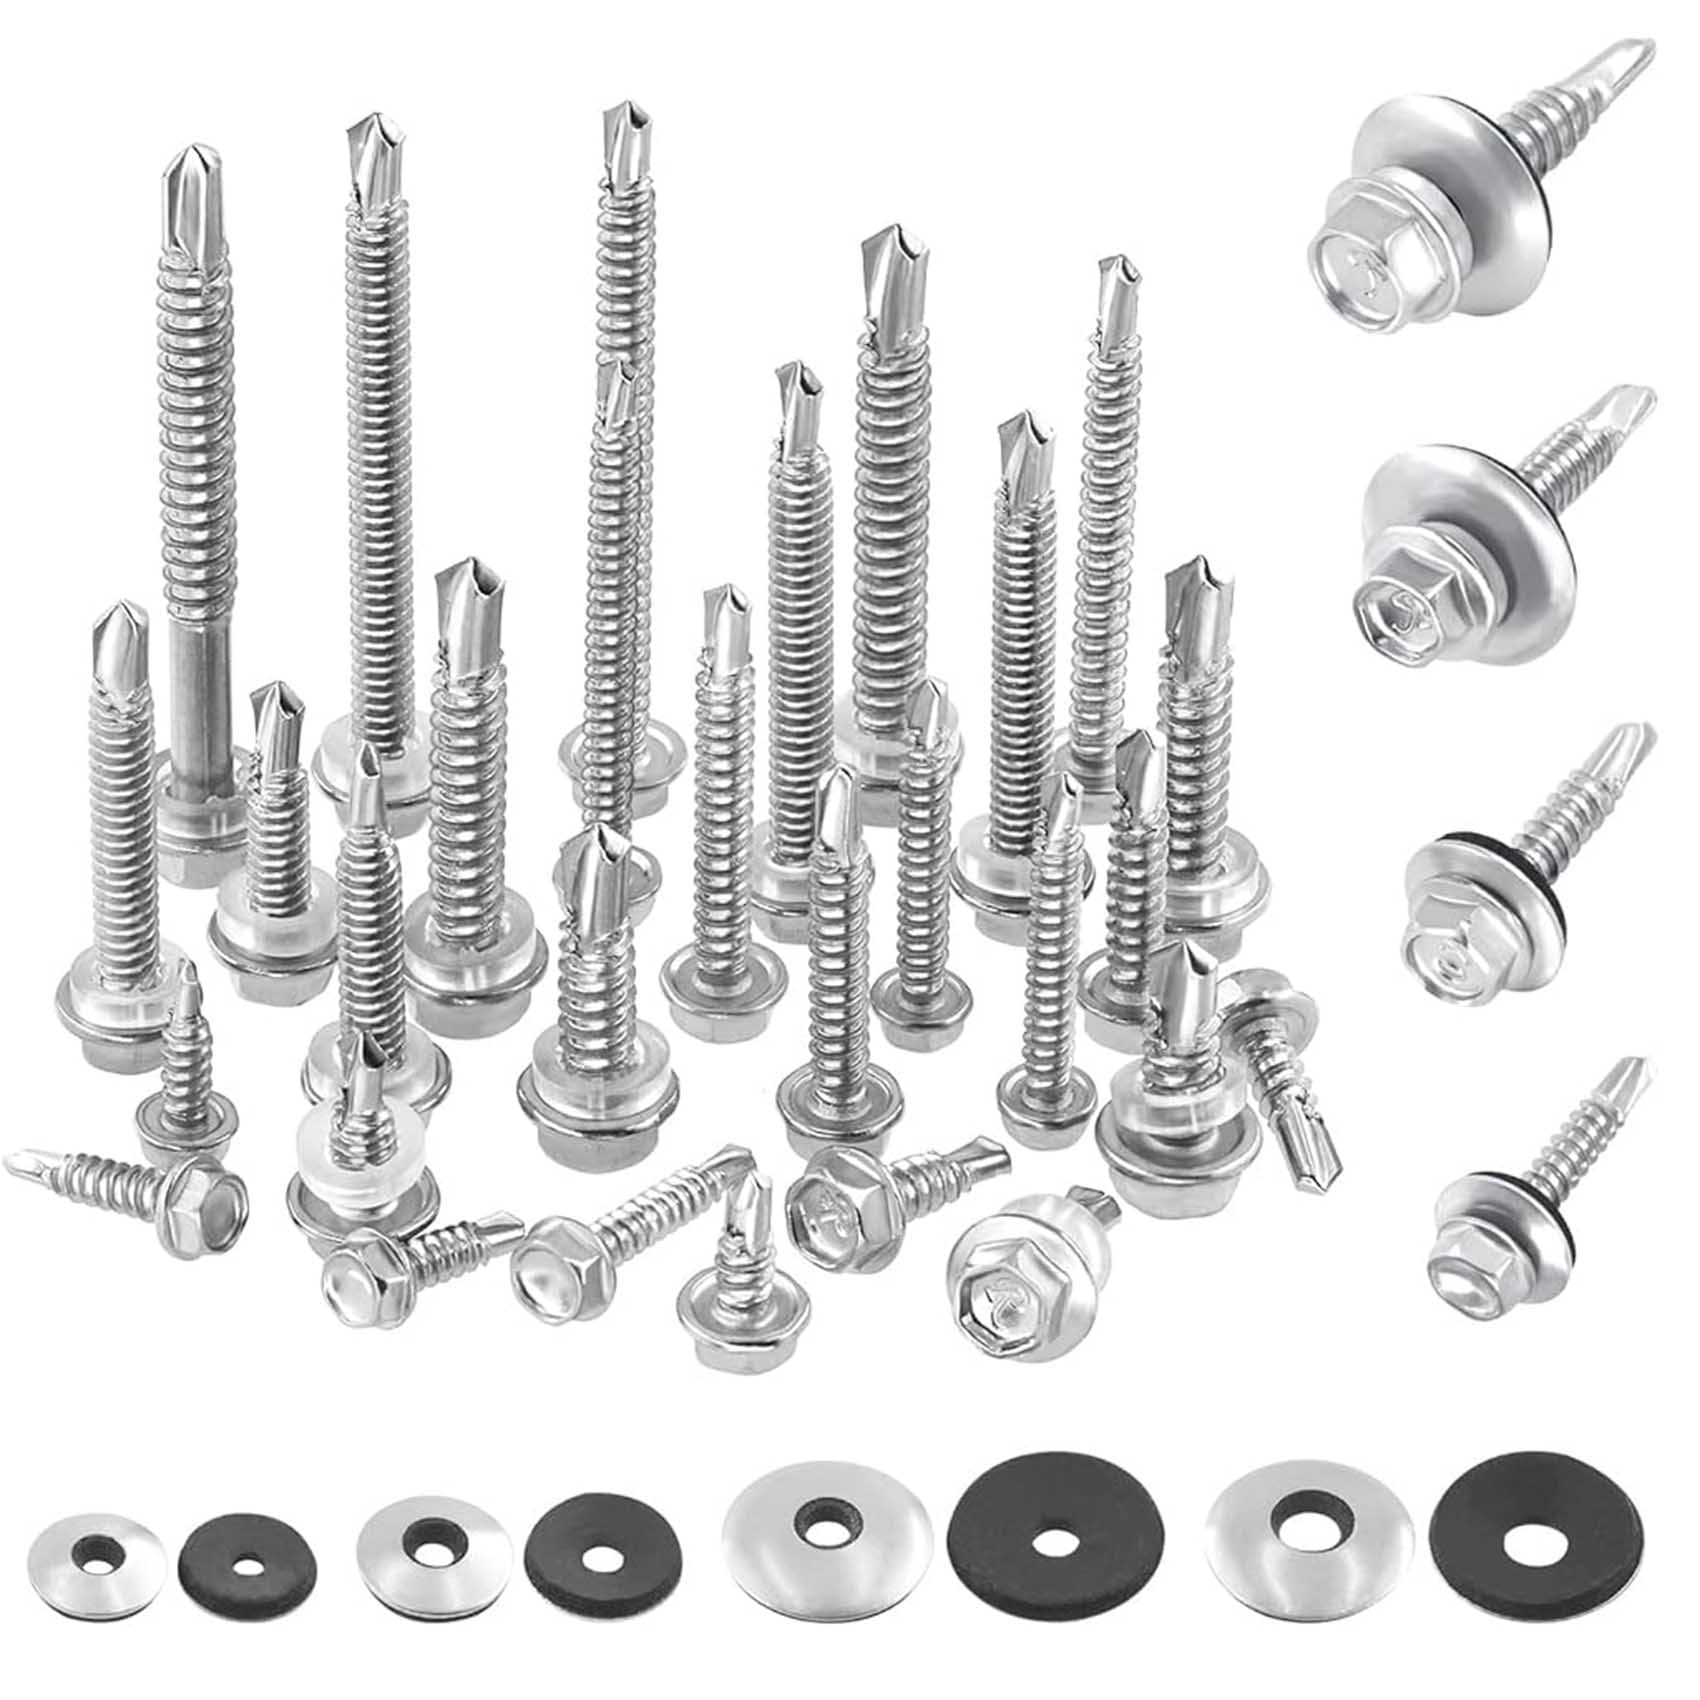 Stainless Steel Hex Head Self Drilling Screw With EPDM Washer Suppliers in Mumbai India